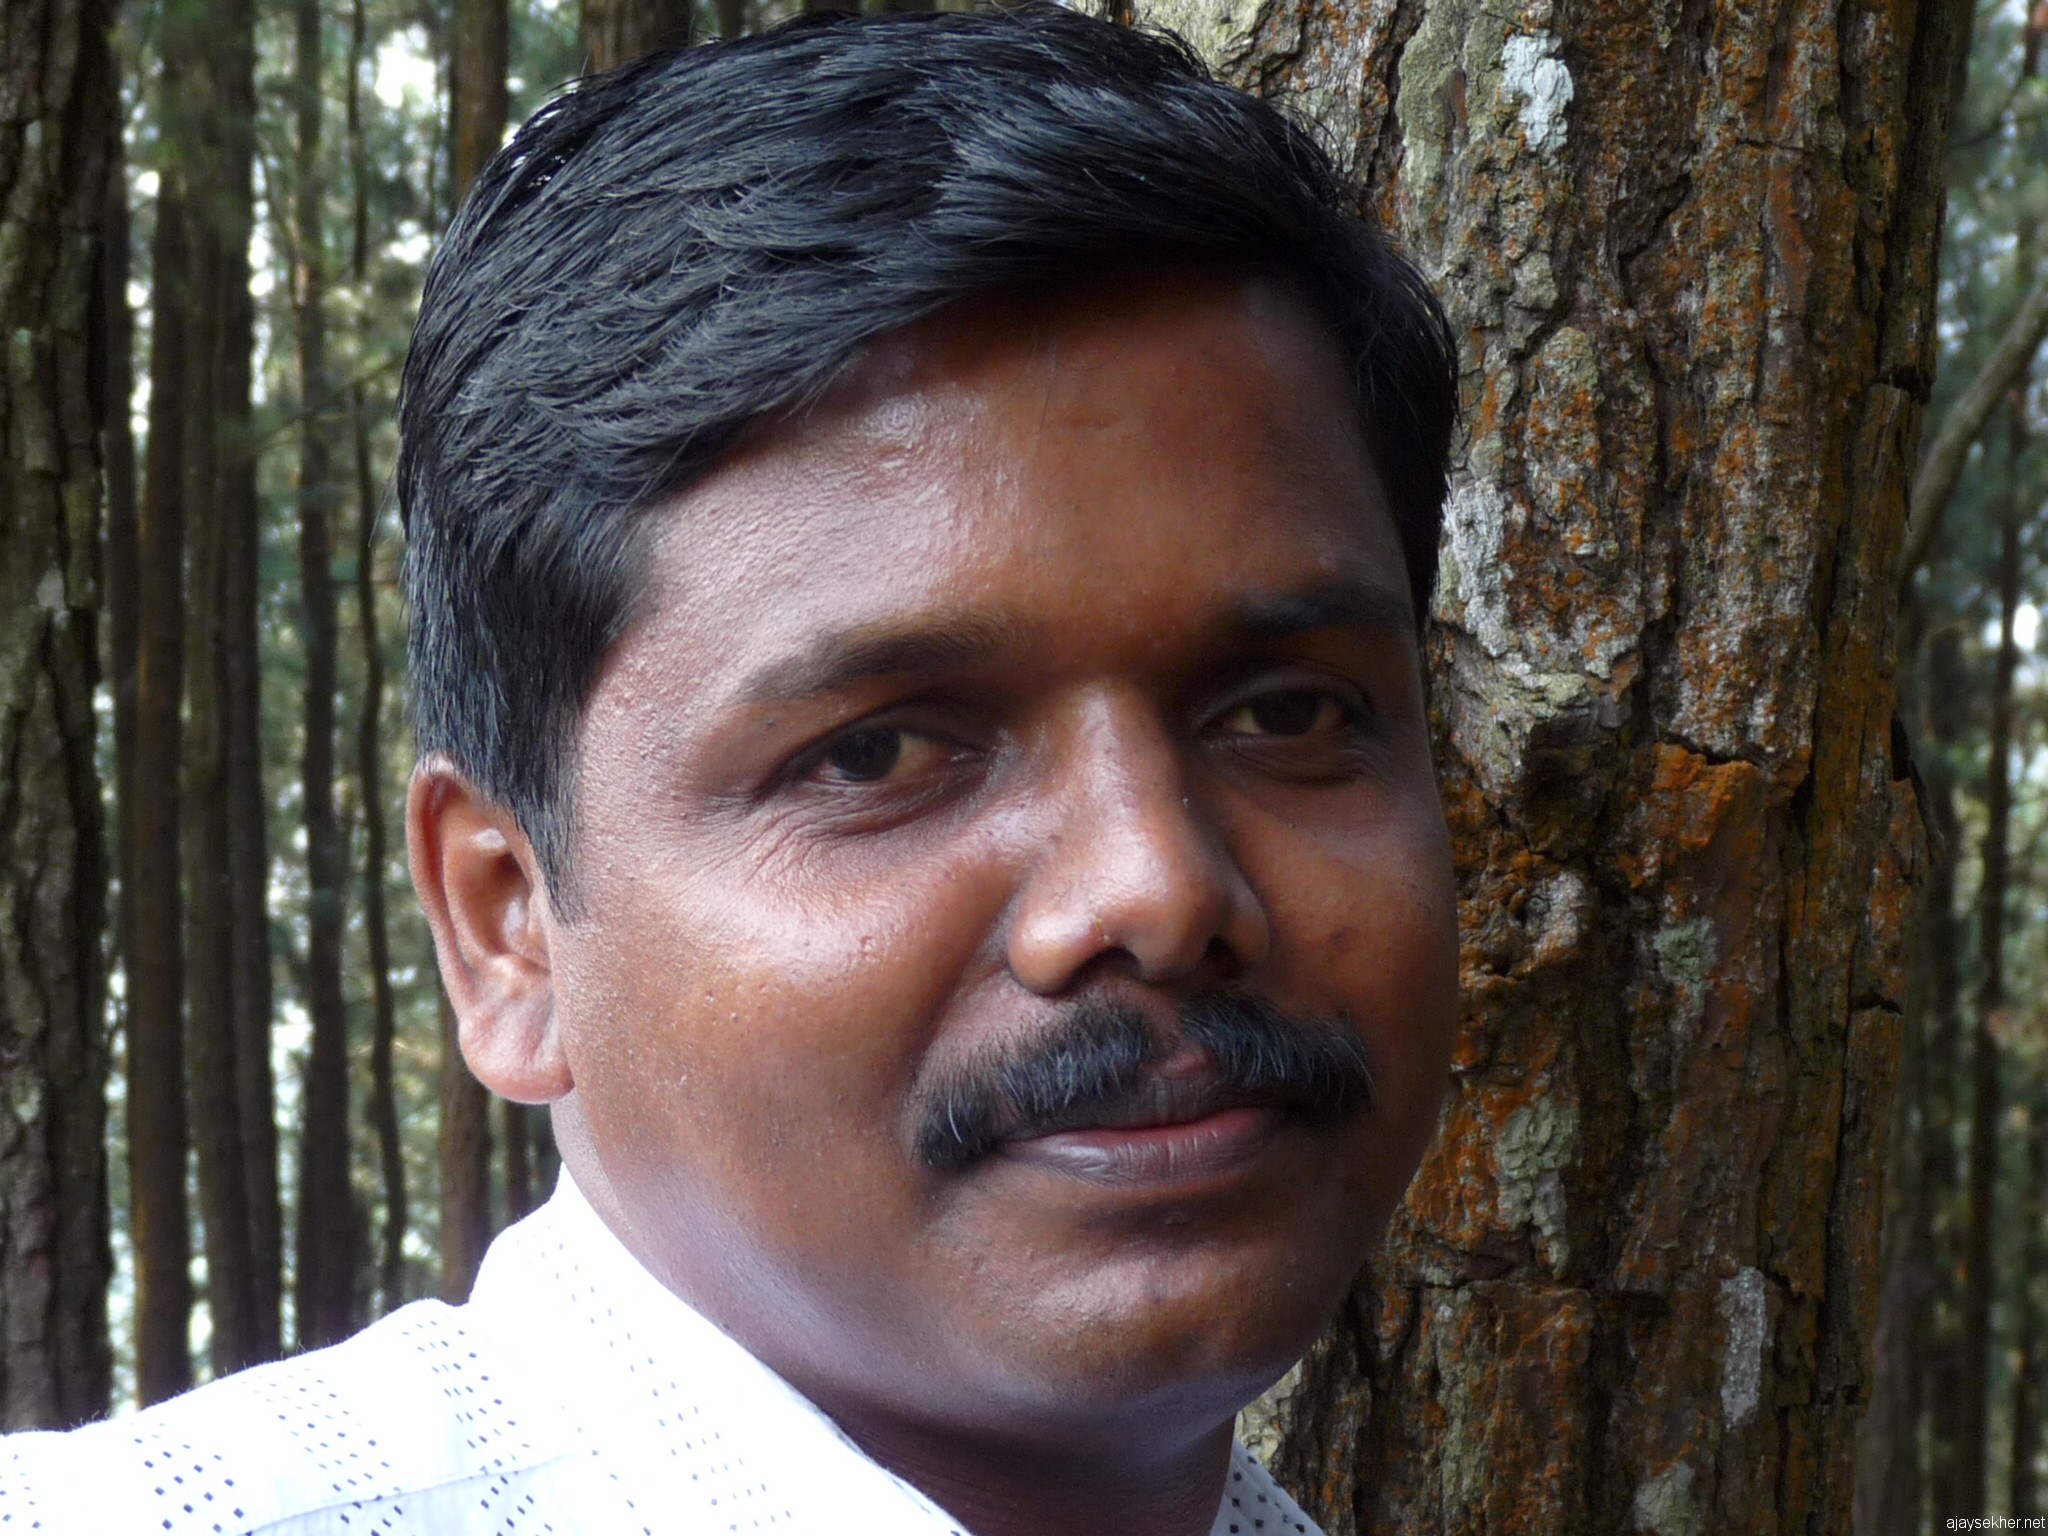 Santhosh O K in the pine forest, Vagaman, April 2011